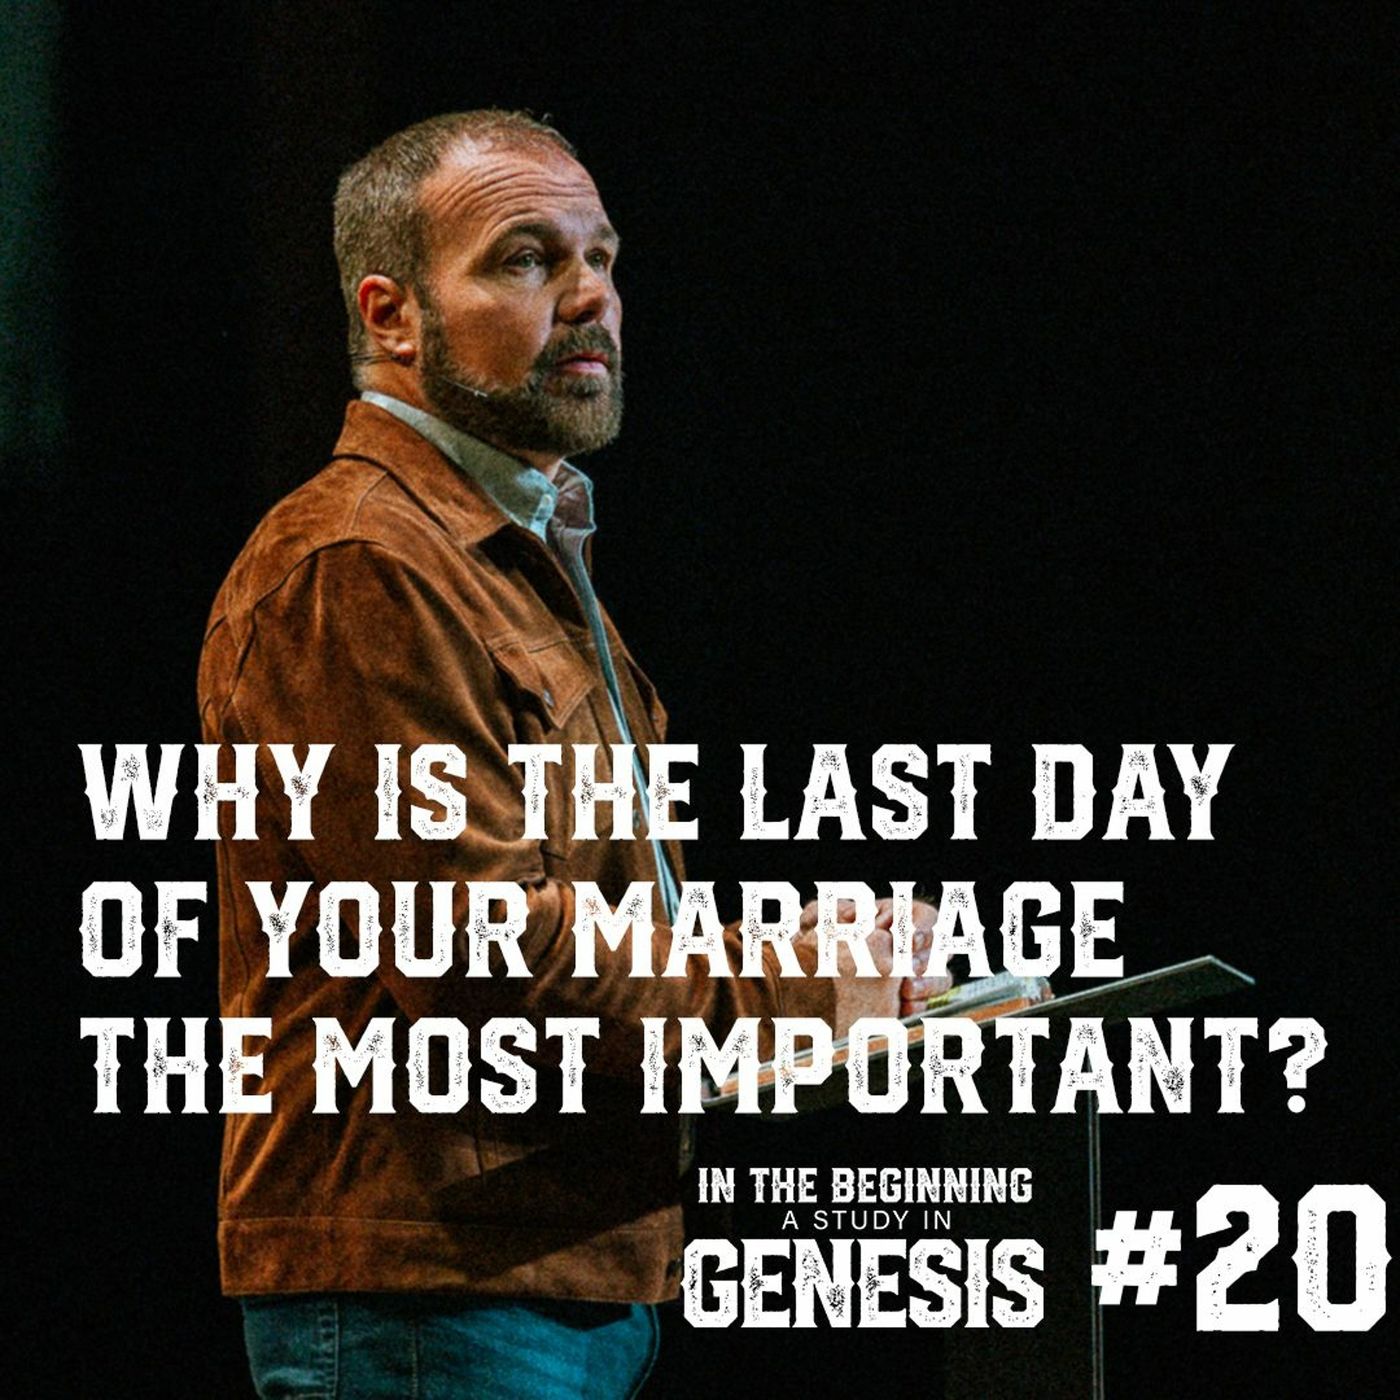 Genesis #20 - Why is the Last Day of your Marriage is the Most Important?